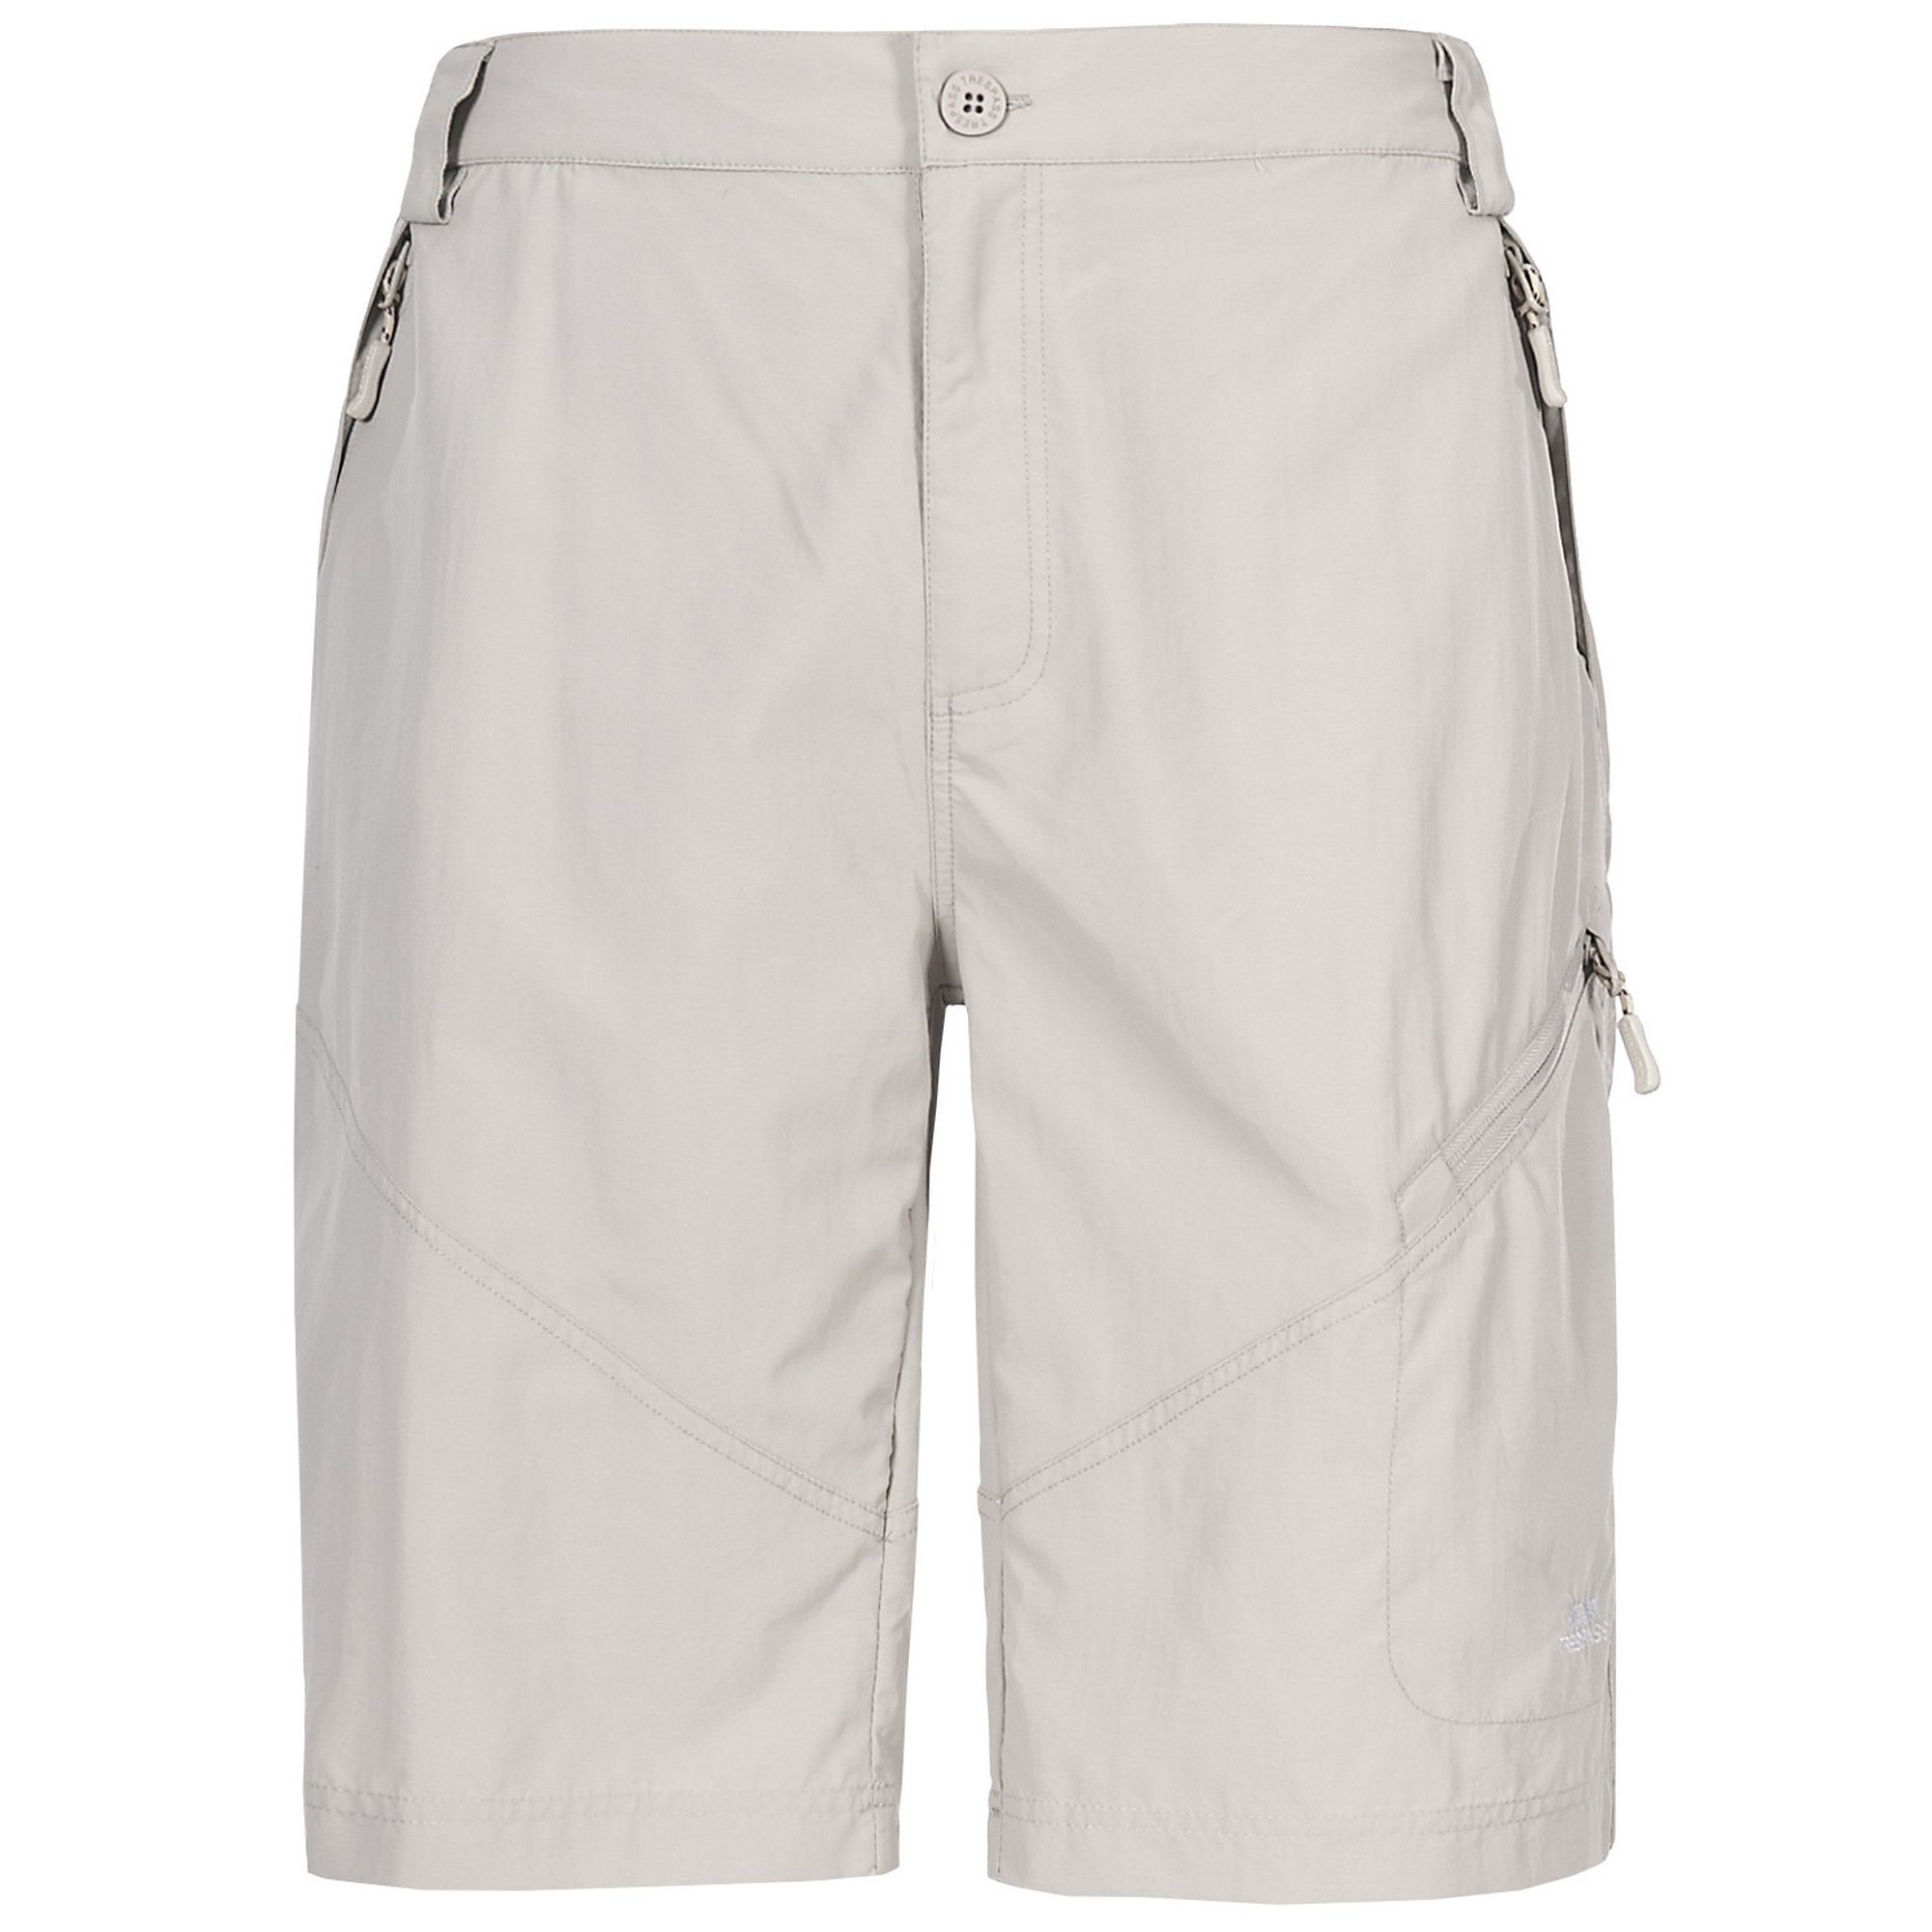 Mens hiking shorts. Quick drying build. Moisture wicking. Flat waist with side elastic. 4 zipped pockets. 100% Polyamide.